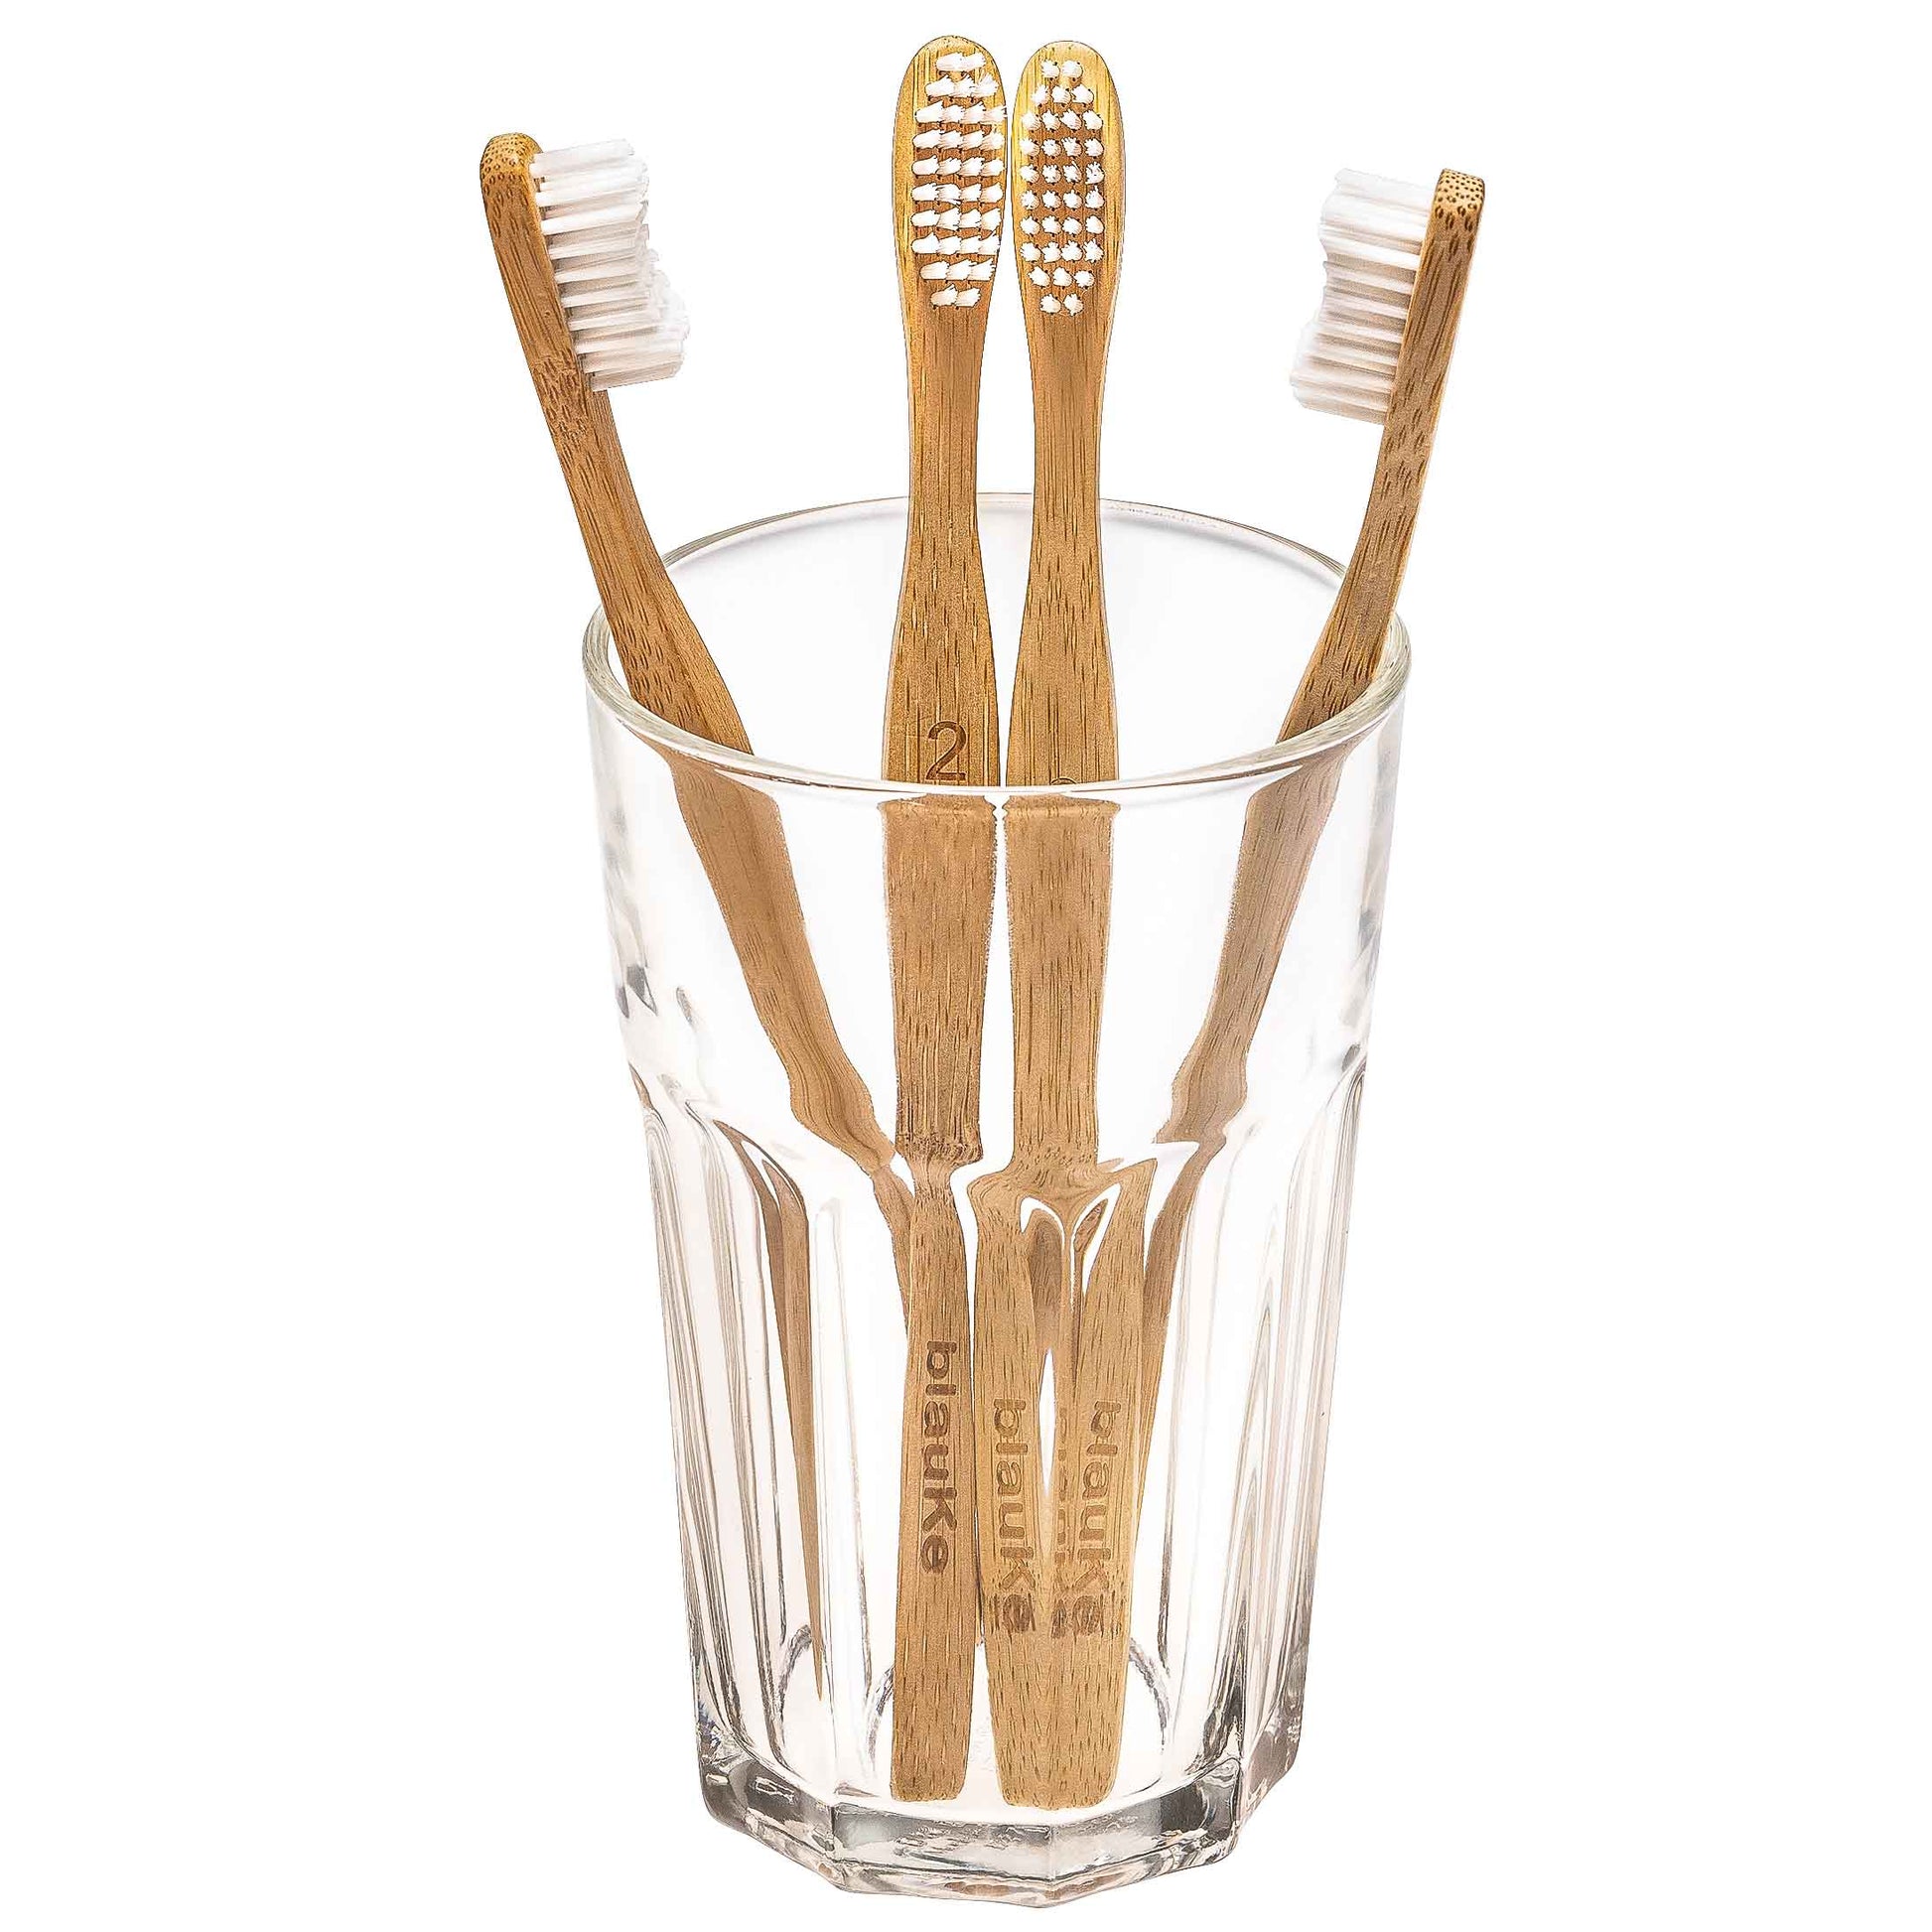 Bamboo Toothbrush Set 4-Pack - Bamboo Toothbrushes with Medium Bristles for Adults - Eco-Friendly, Biodegradable, Natural Wooden Toothbrushes-8